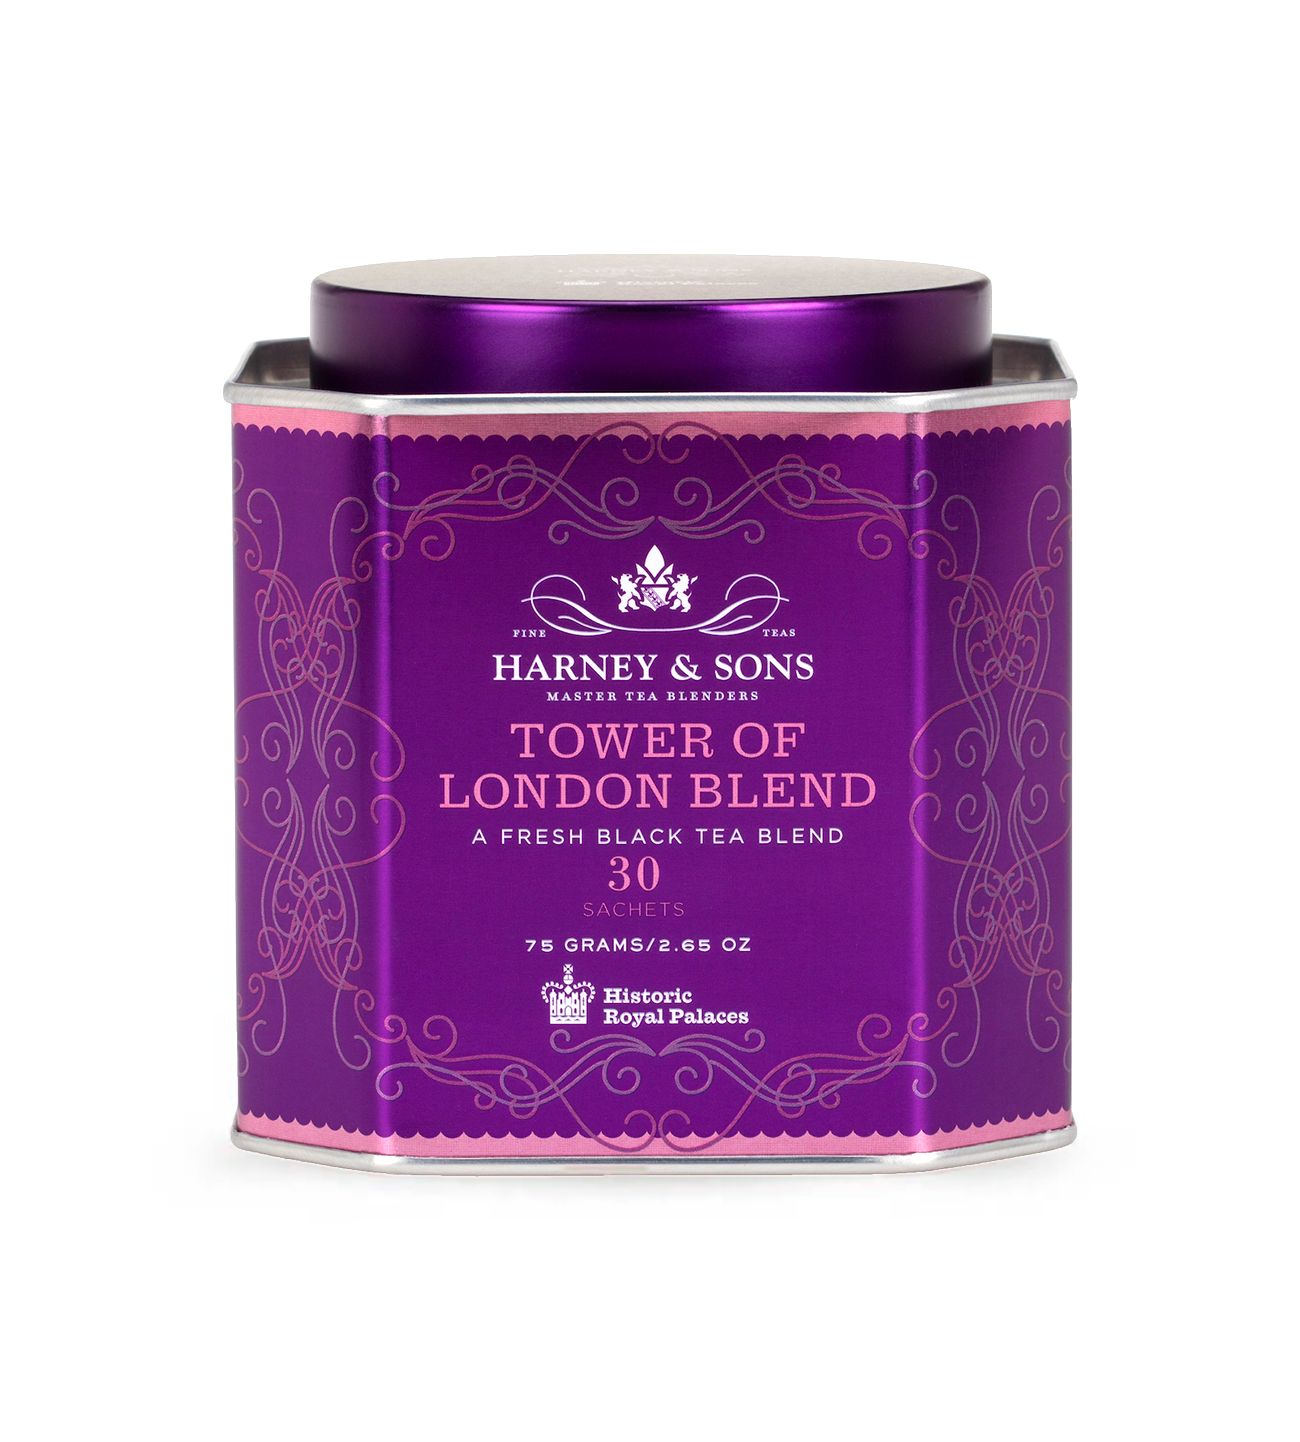 Tower of London Blend, HRP Tin of 30 Sachets - Black Tea with Black Currant, Vanilla and Honey Flavours - Harney & Sons Fine Teas Europe